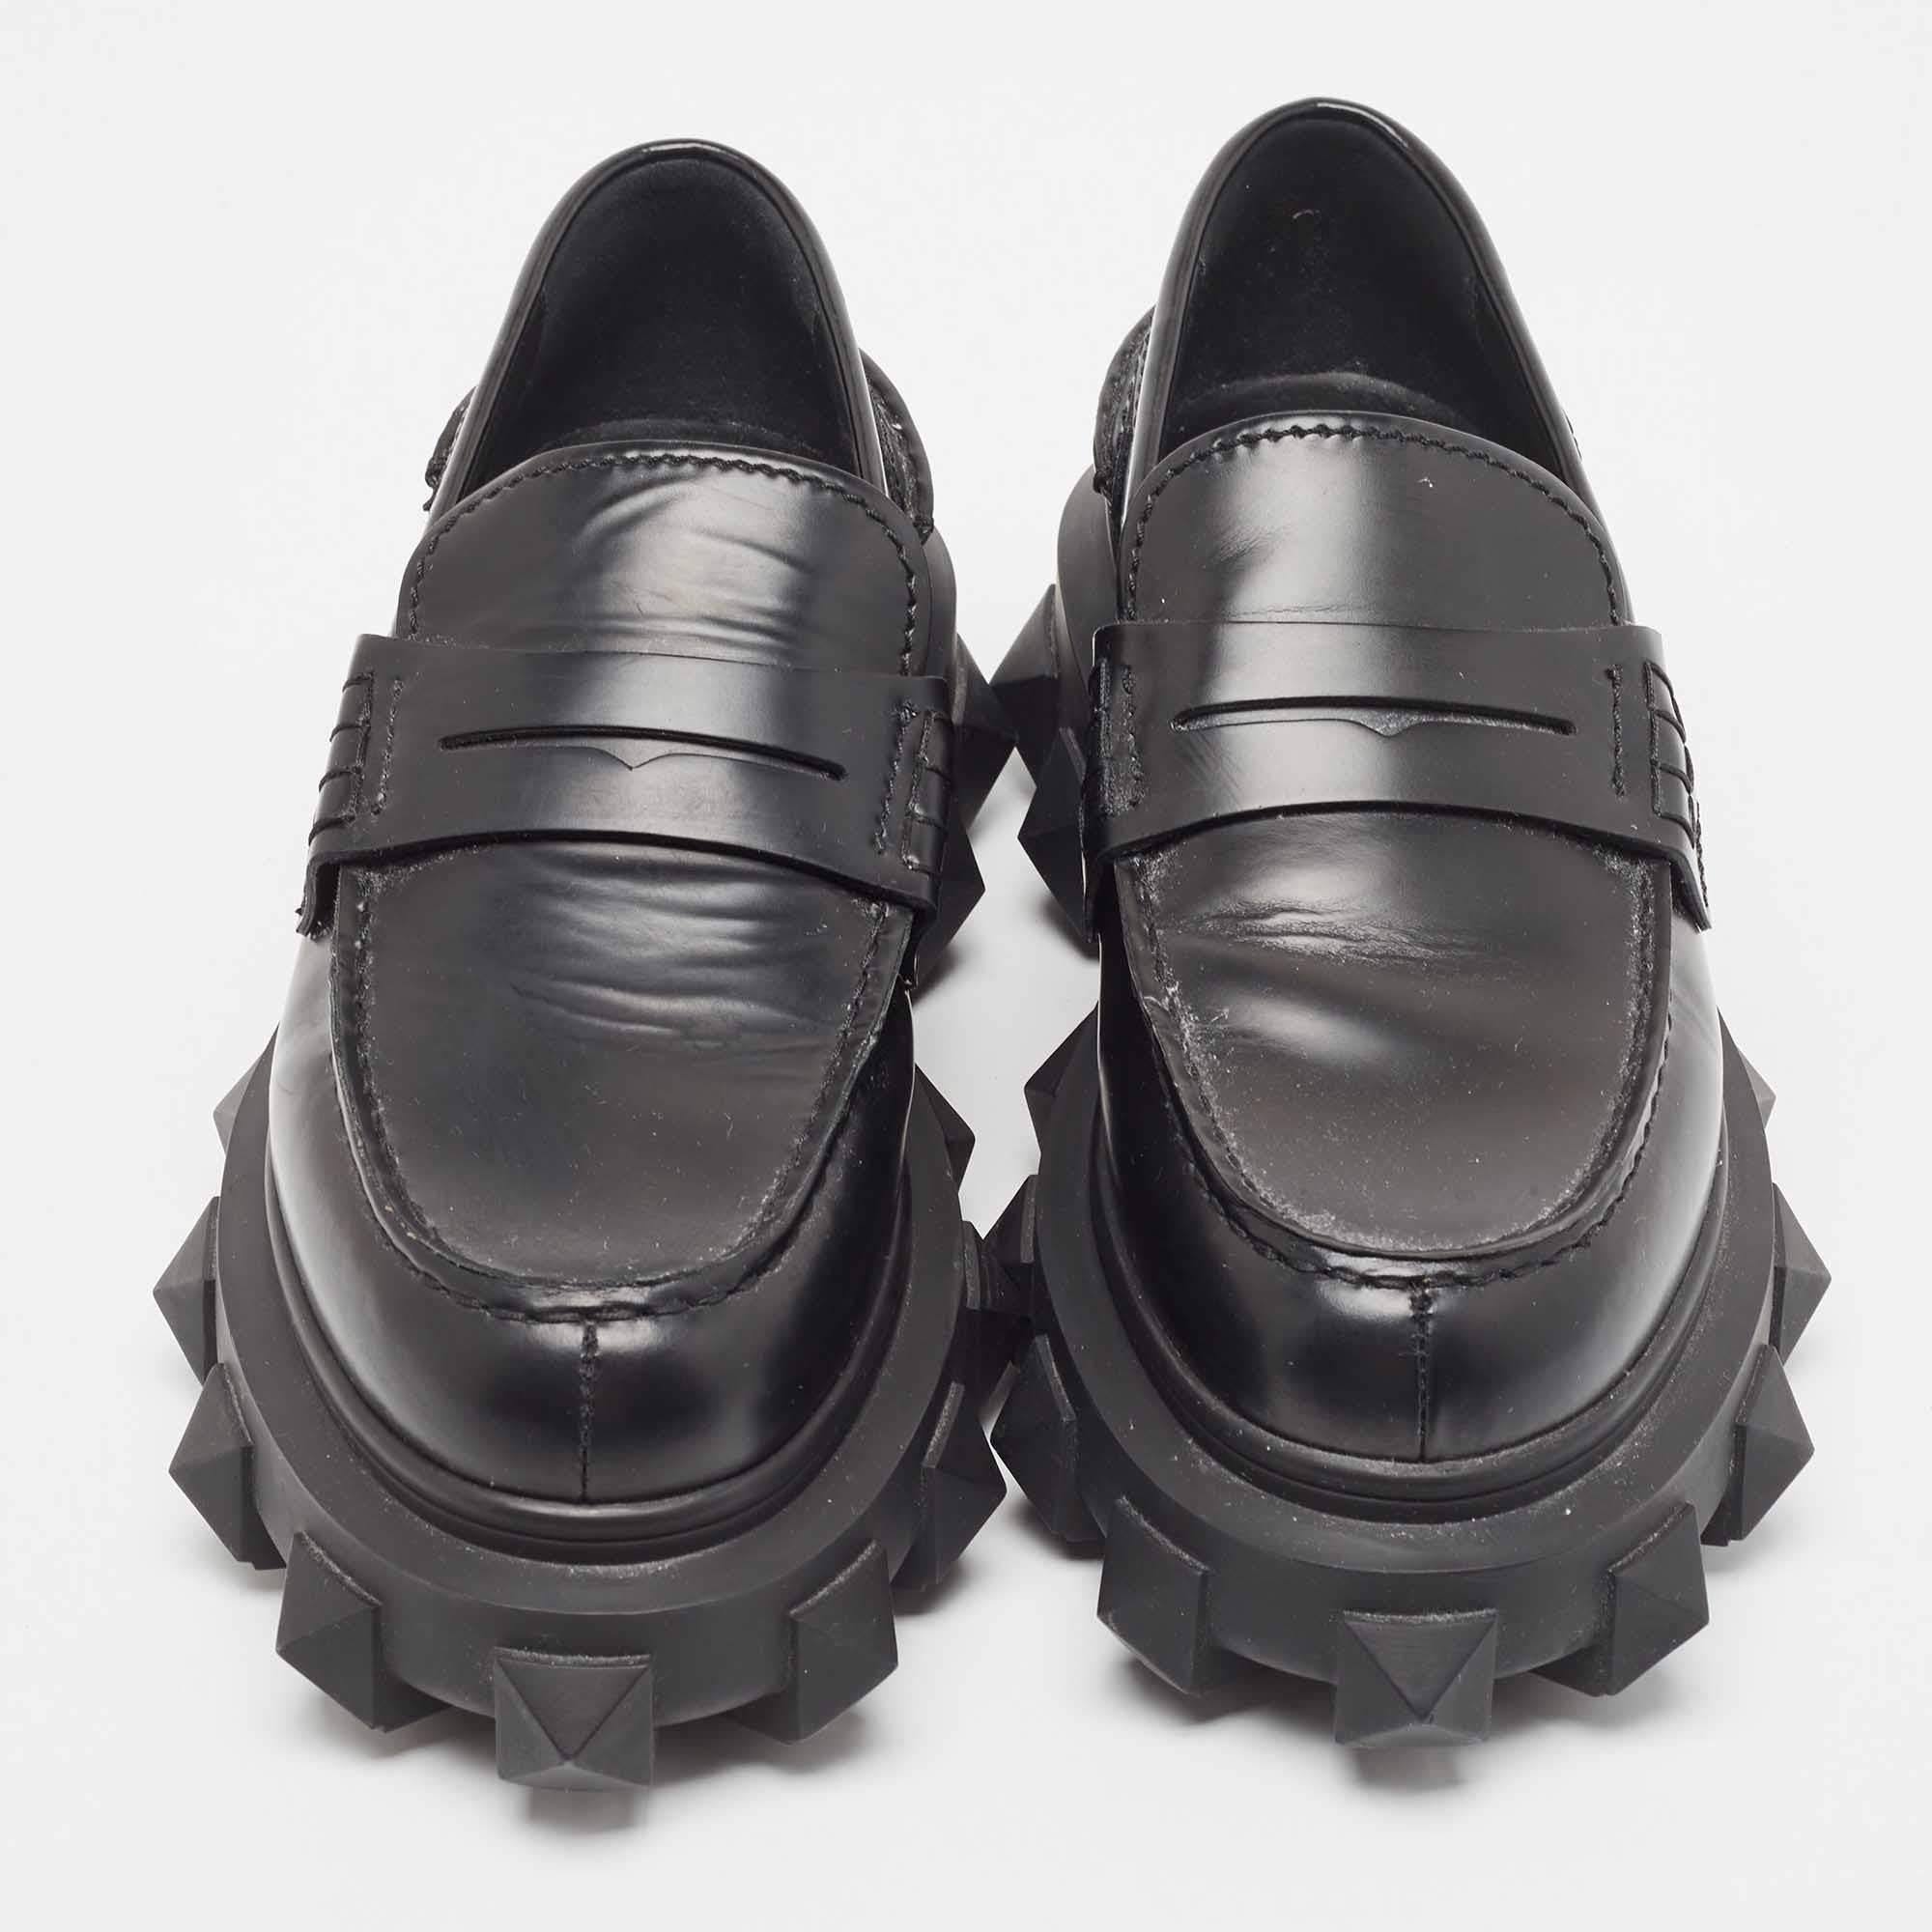 Packed with style and comfort, these Valentino Garavani loafers are gentle on the feet so that you can glide through the day. They have a sleek leather upper balanced on statement soles.


Includes: Original Dustbag, Original Box